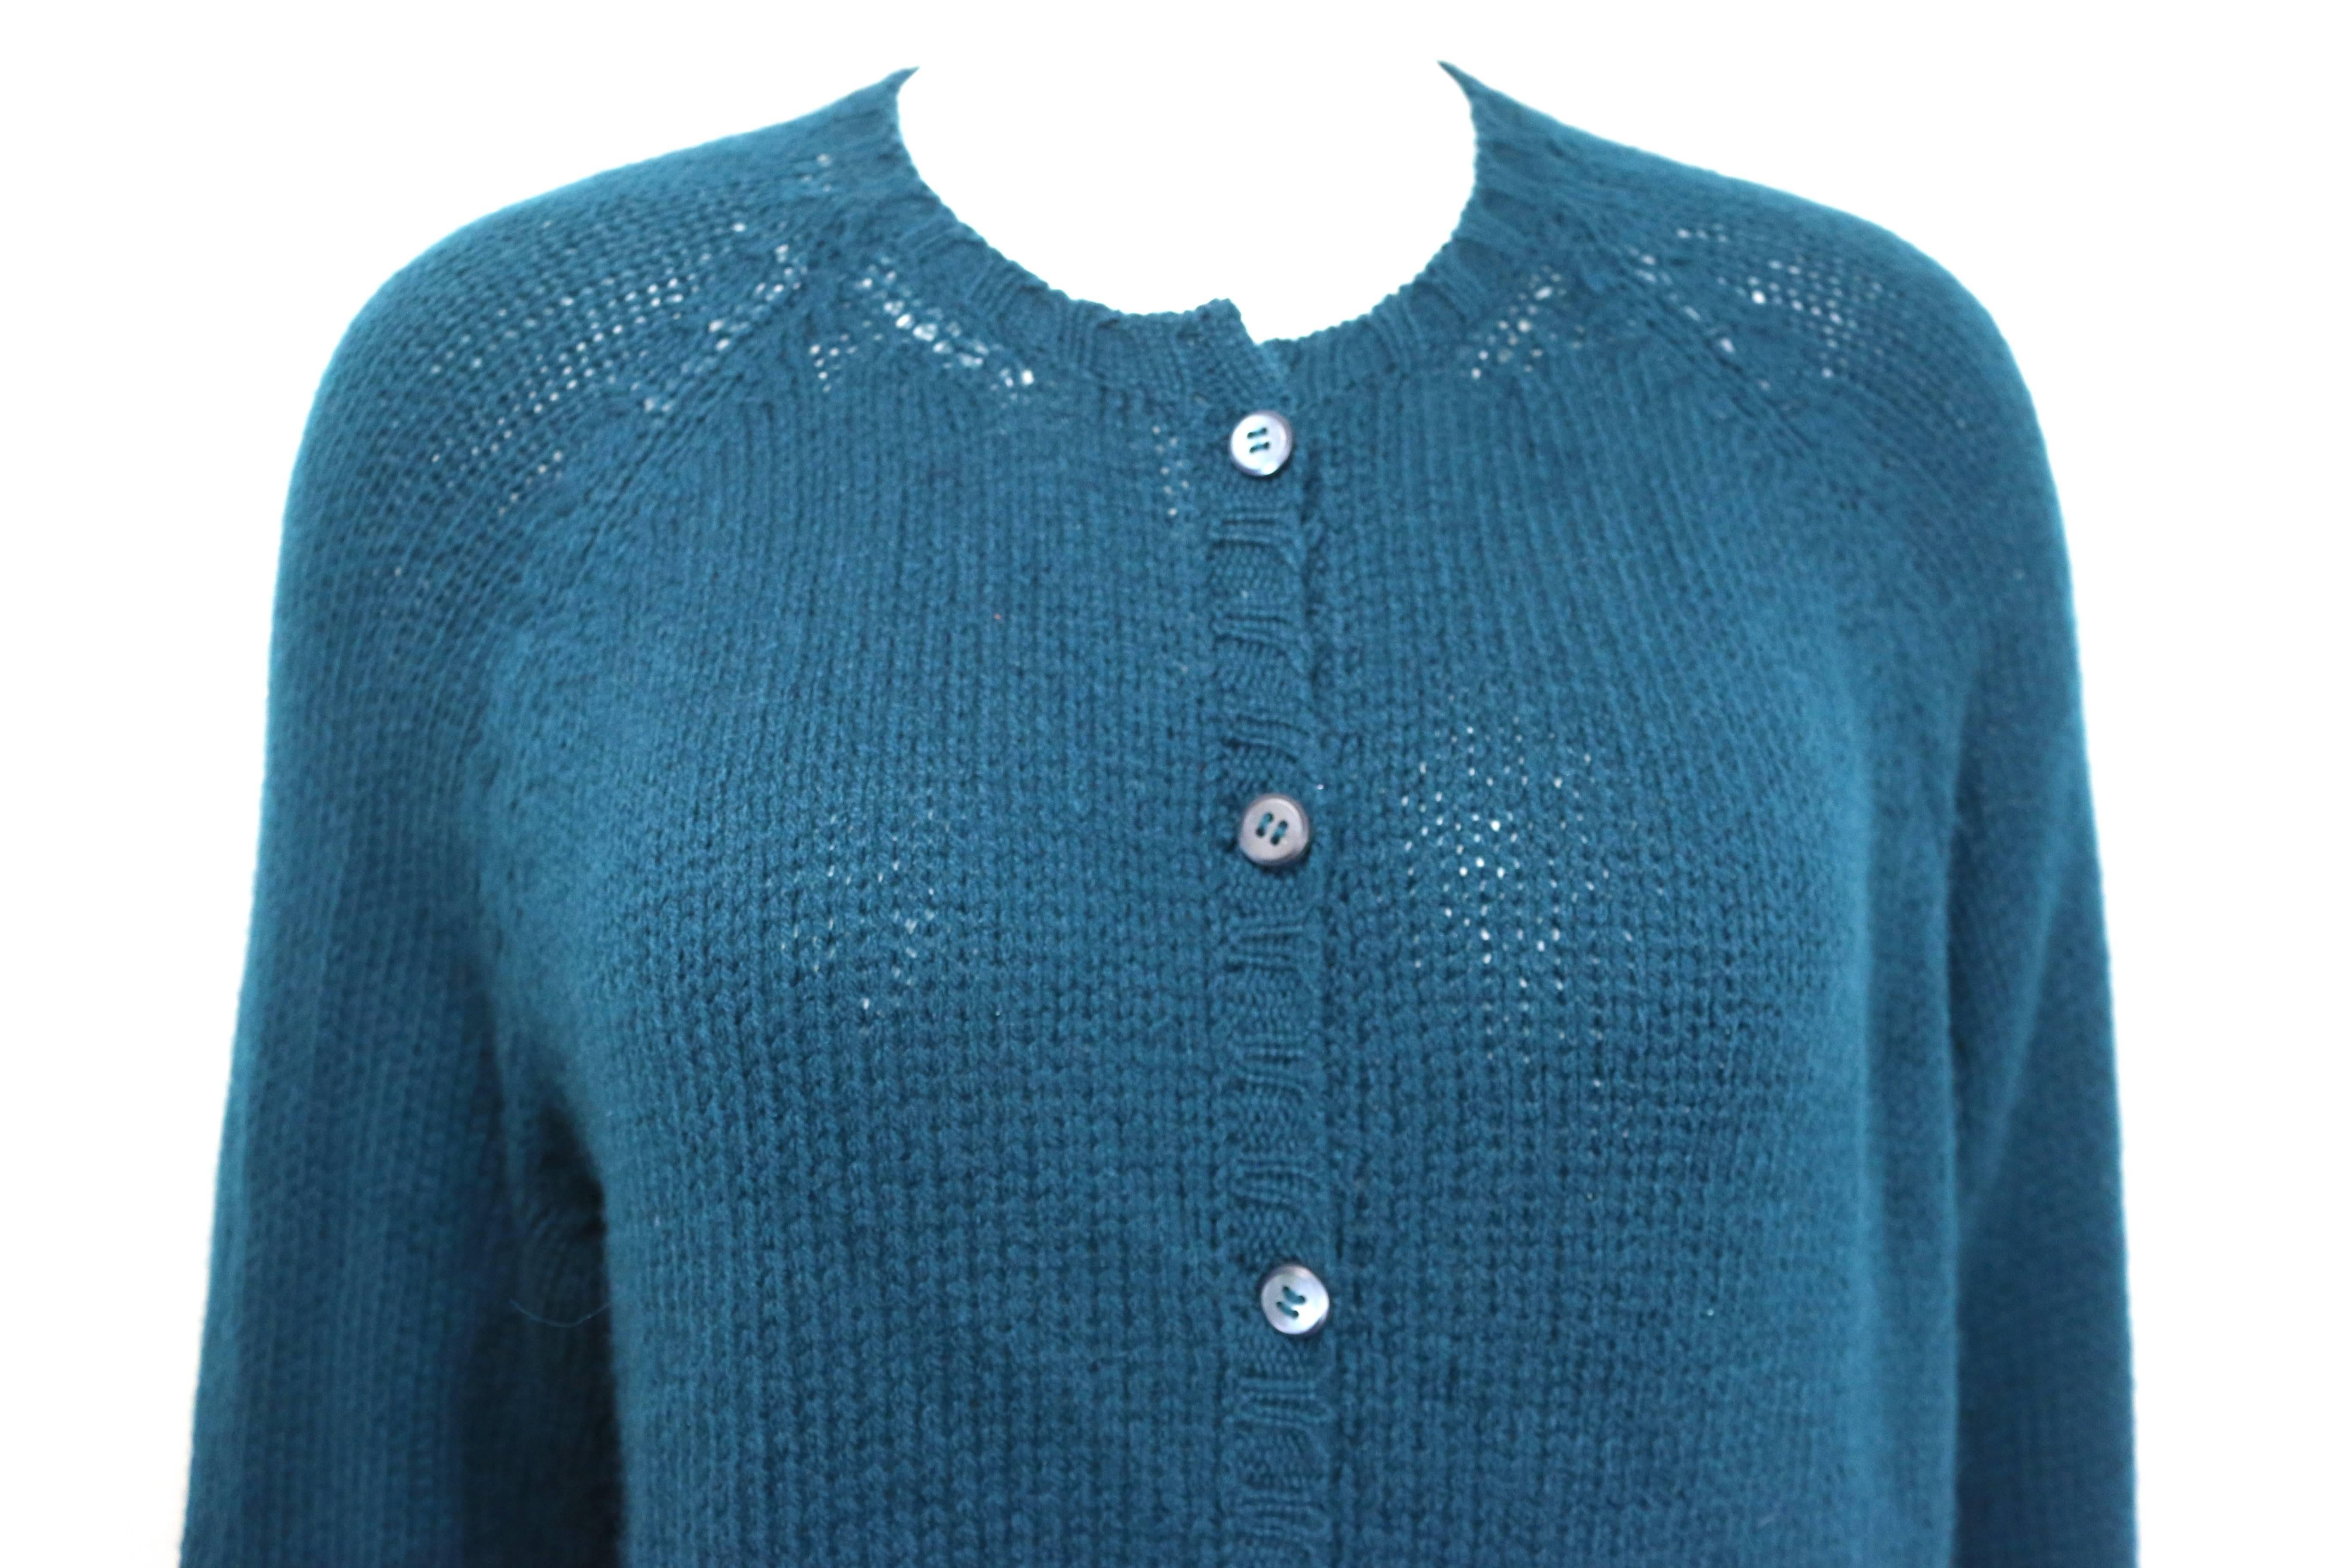 - Vintage 90s Prada teal cashmere cardigan.  

- Mother of Pearl buttons closure. 

- Size 46. 

- 100% Cashmere